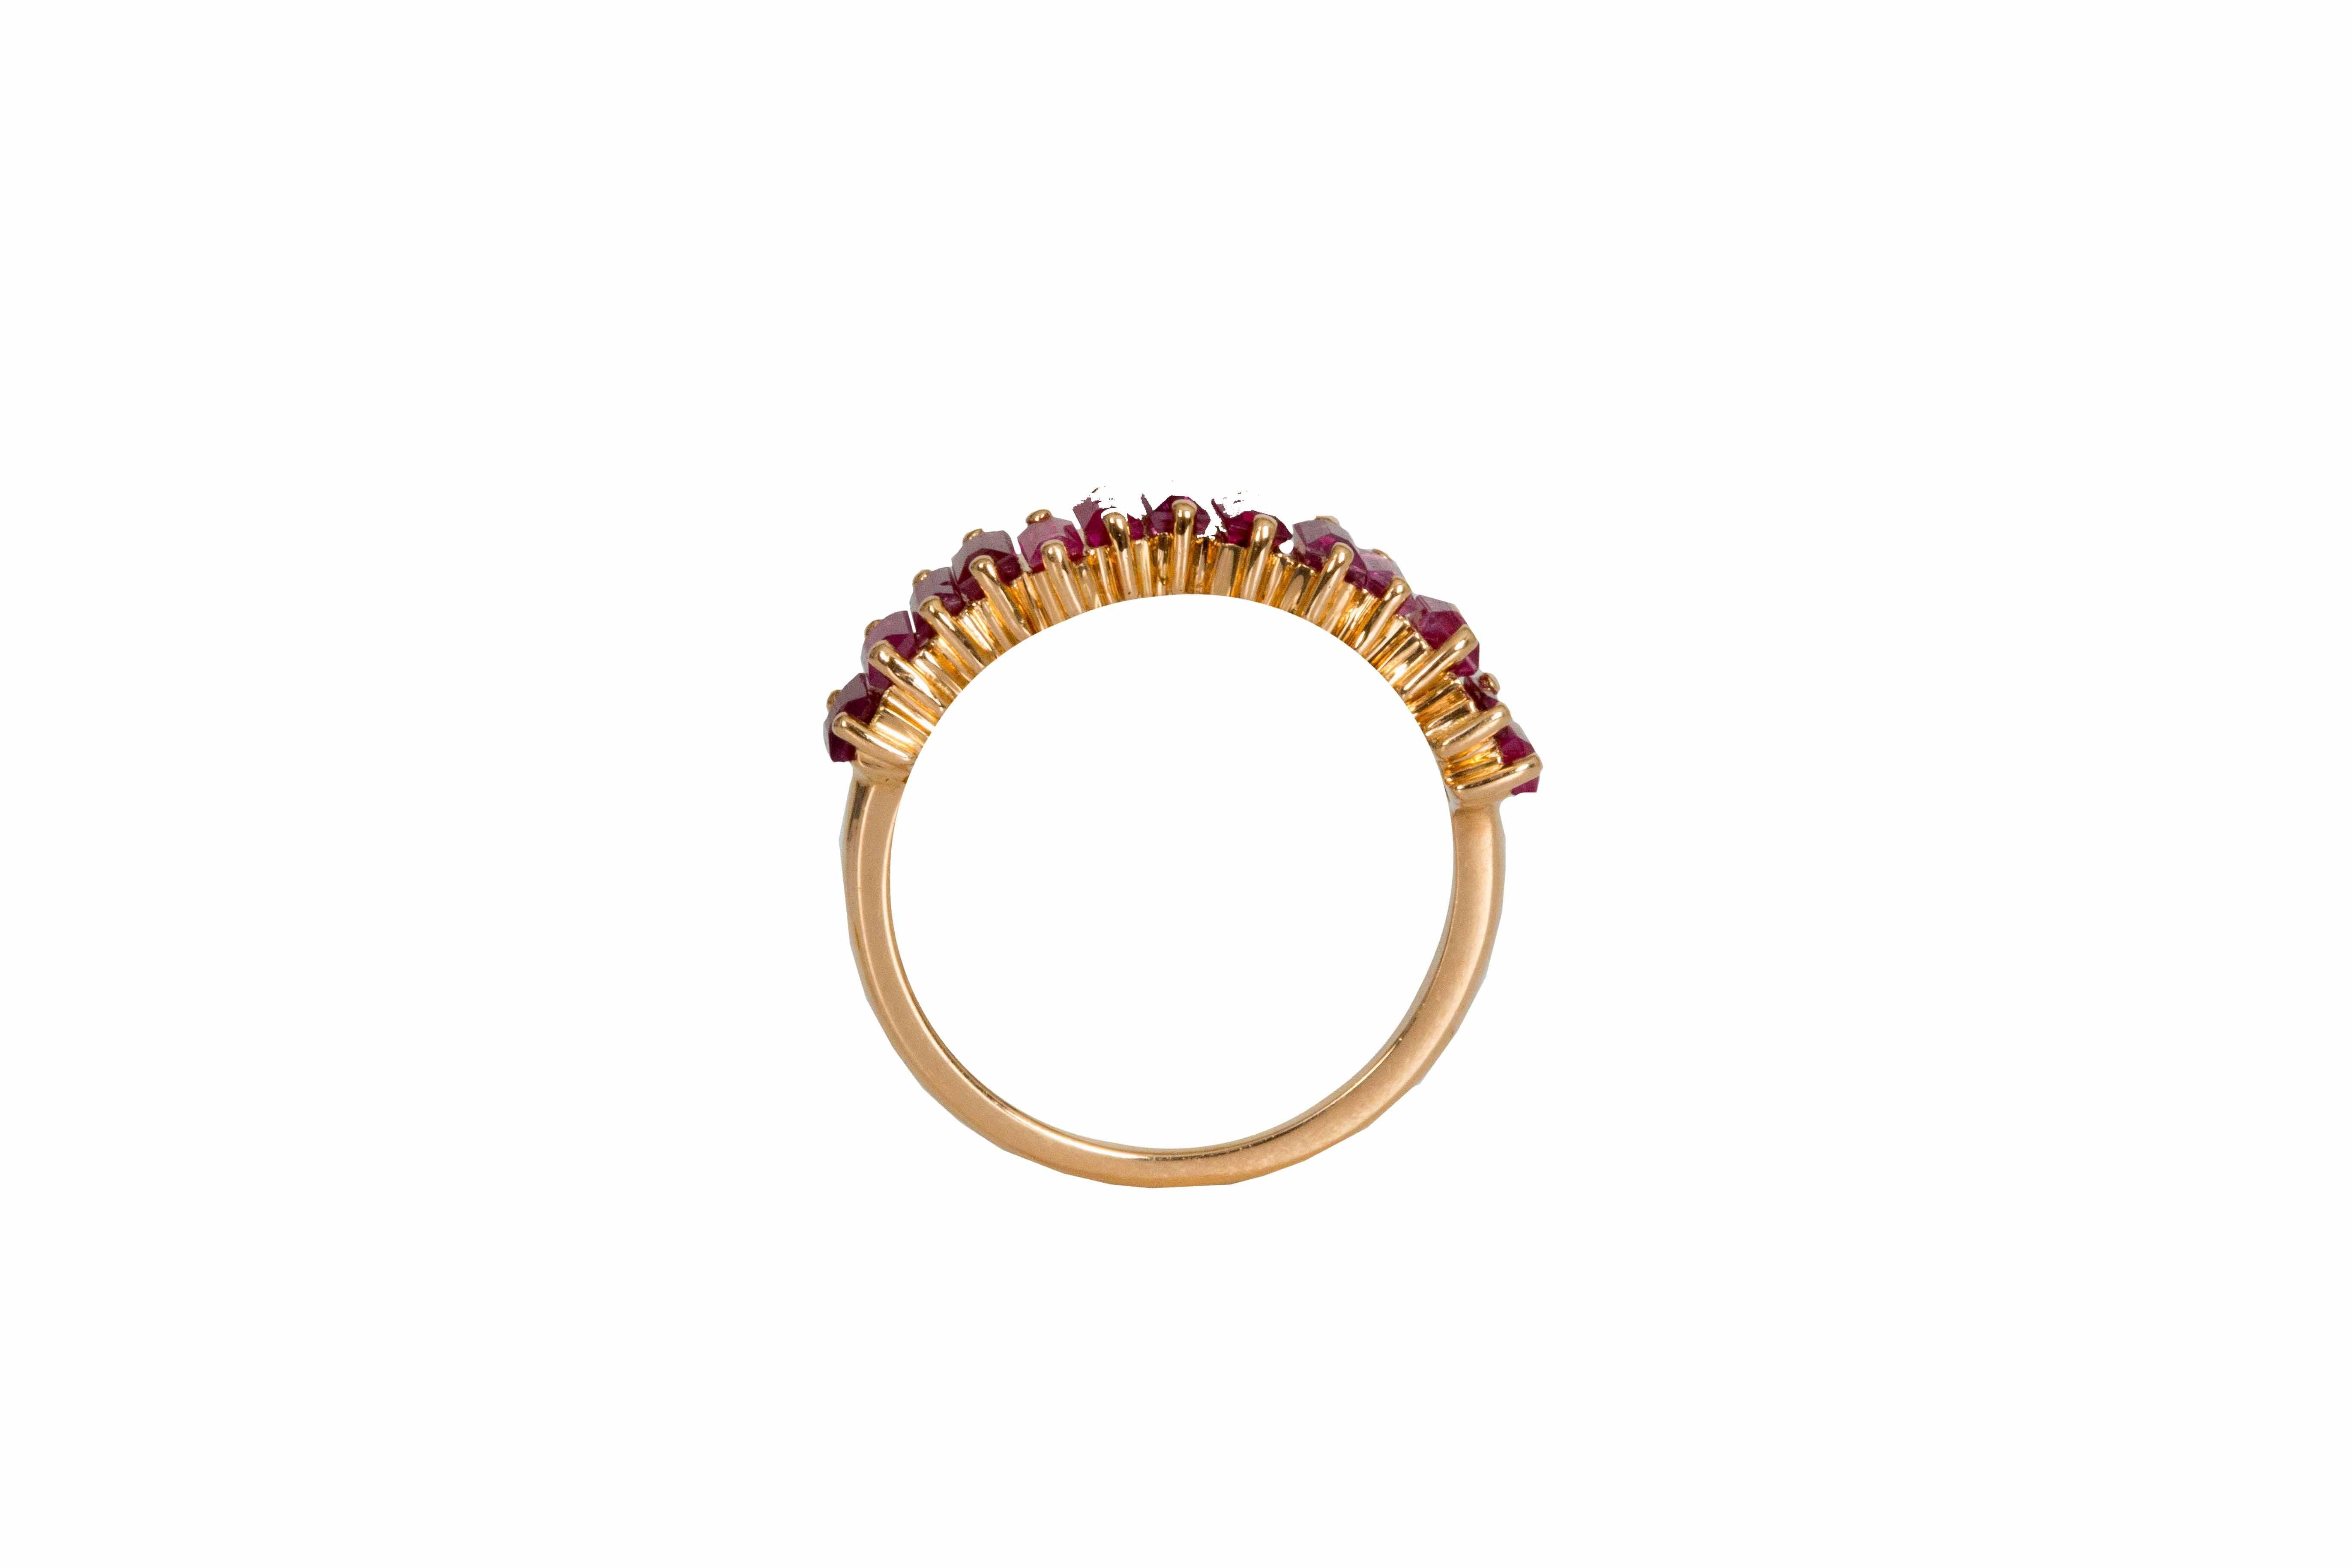 18 carat white gold band with 14 baguette cut rubies weighing 1.50 carats total. Our rubies are hand selected by our team of experts and carefully set unevenly to create a fascinating composition. A twist on tradition this 